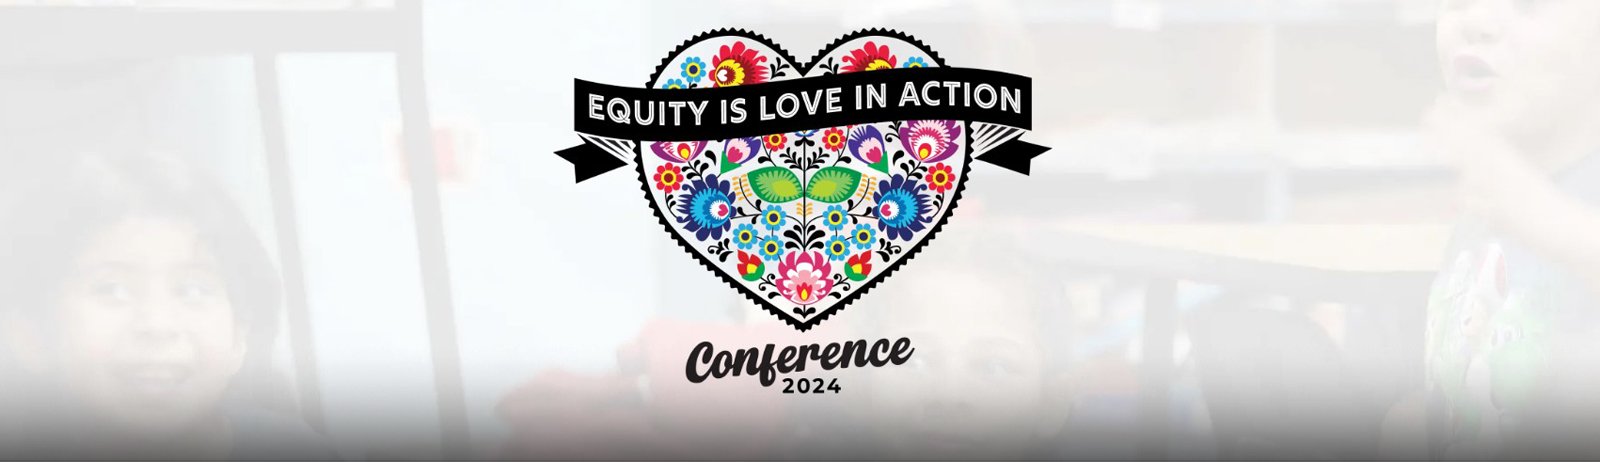 Equity Conference 2024: Equity is Love in Action